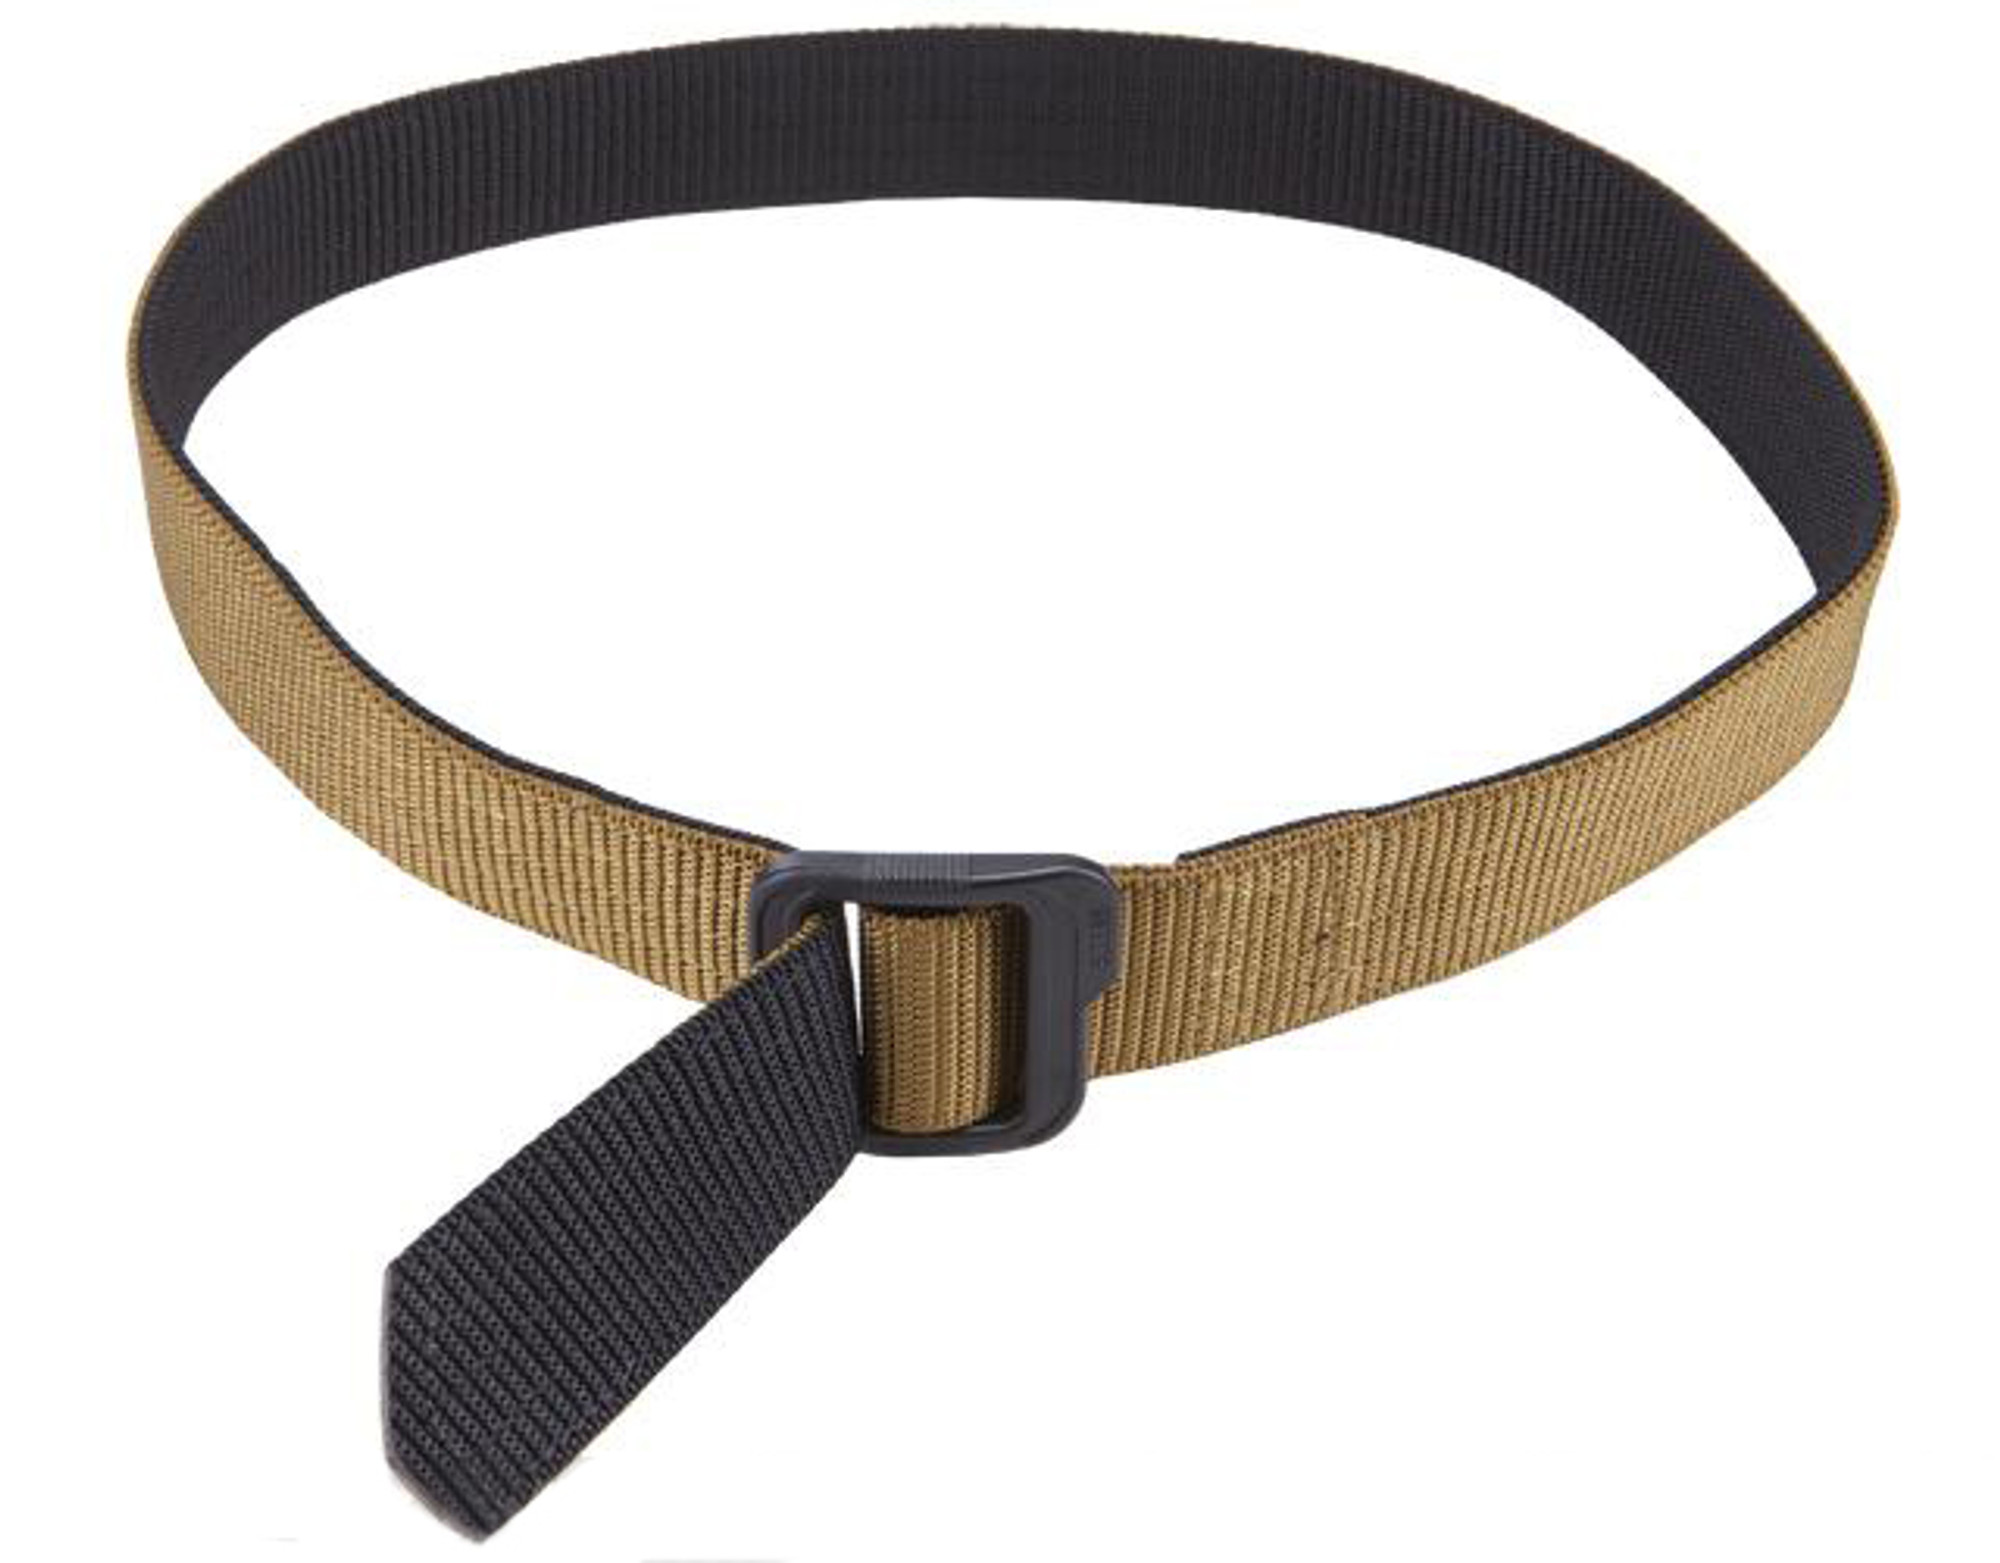 5.11 Tactical 1.5" Double Duty TDU Belt - Coyote / Black (Size: Small)